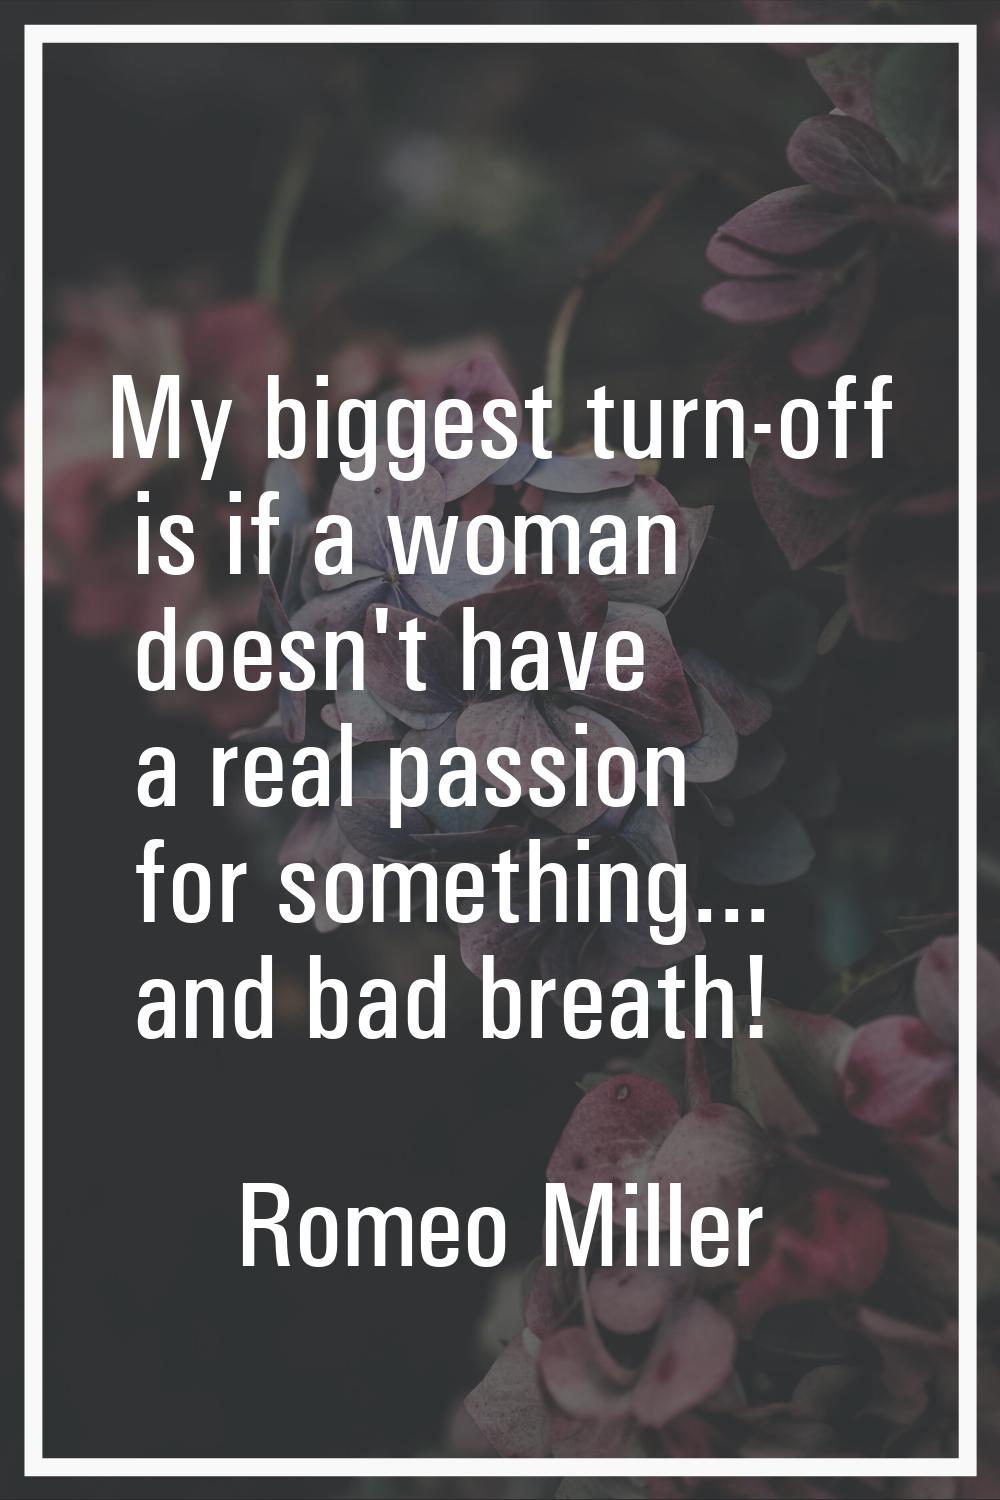 My biggest turn-off is if a woman doesn't have a real passion for something... and bad breath!